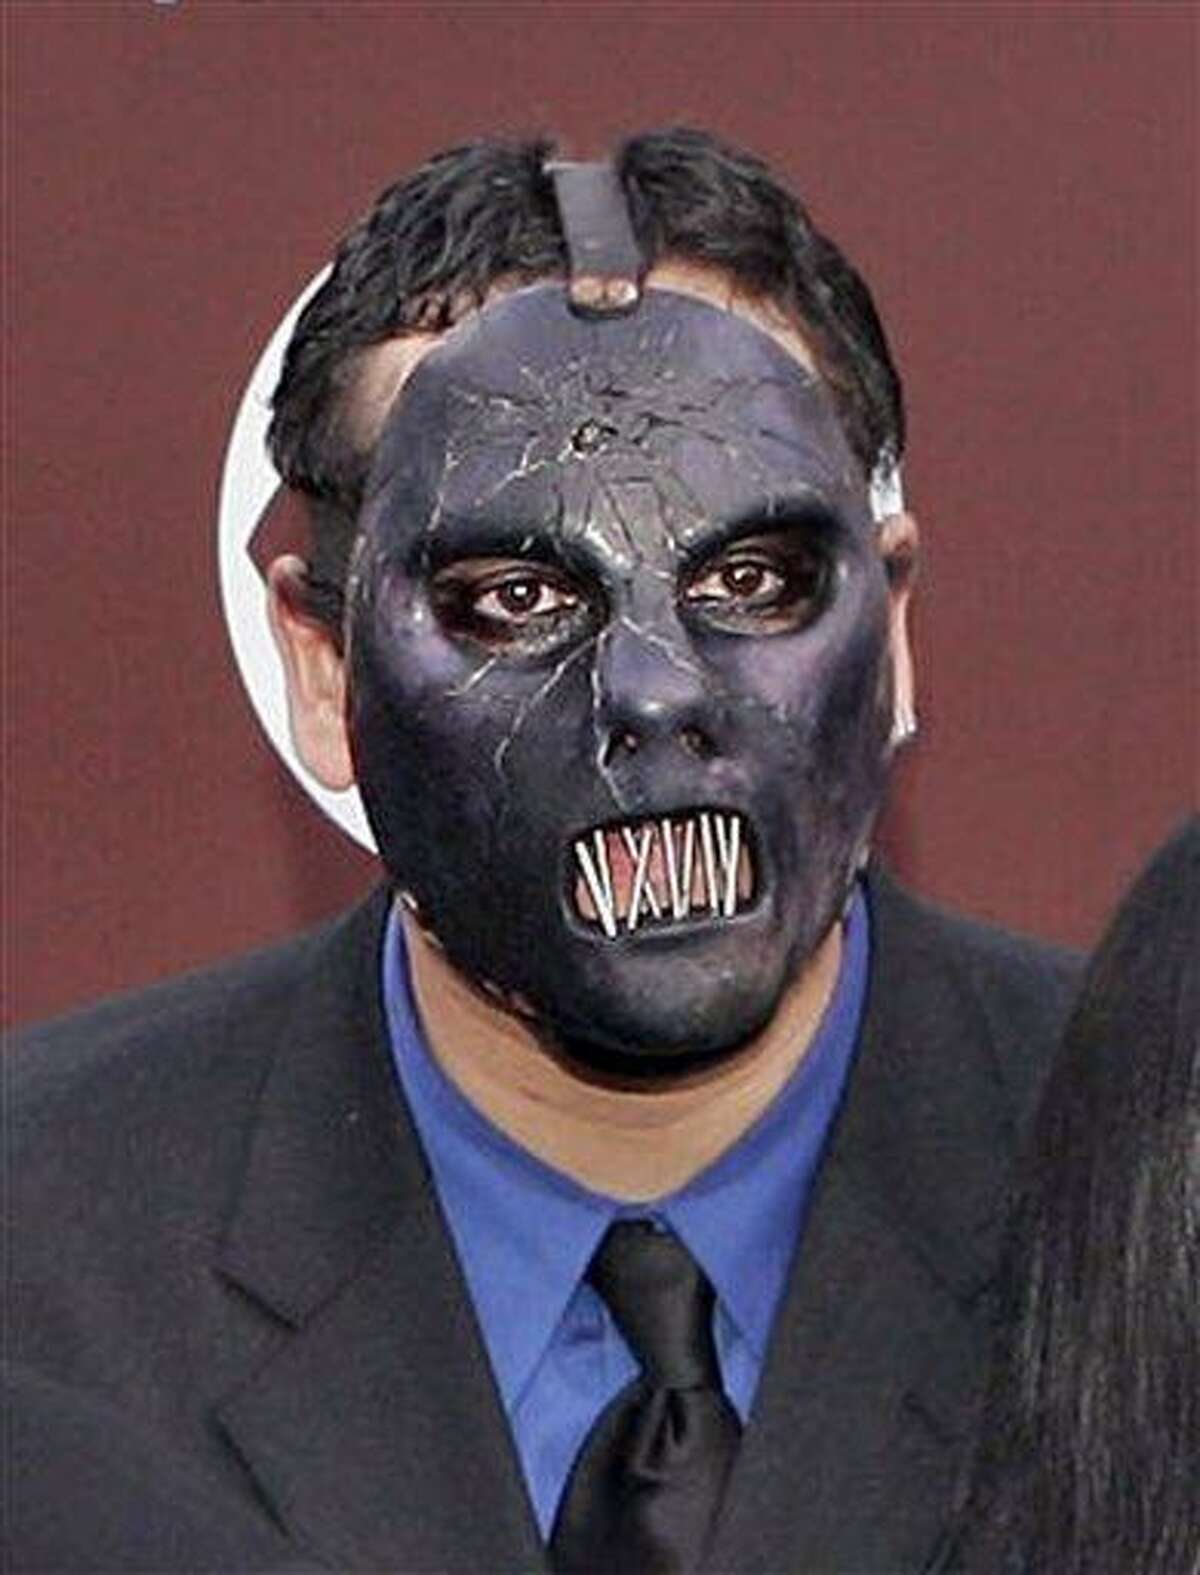 FILE - In this Feb. 13, 2005 file photo, Paul Gray from the group Slipknot arrives for the 47th Annual Grammy Awards at the Staples Center in Los Angeles. Autopsy results show the bassist for heavy metal band Slipknot died of an accidental overdose of morphine and fentanyl, a synthetic morphine substitute, police said Monday June 21, 2010. (AP Photo/Mark J. Terrill, file)